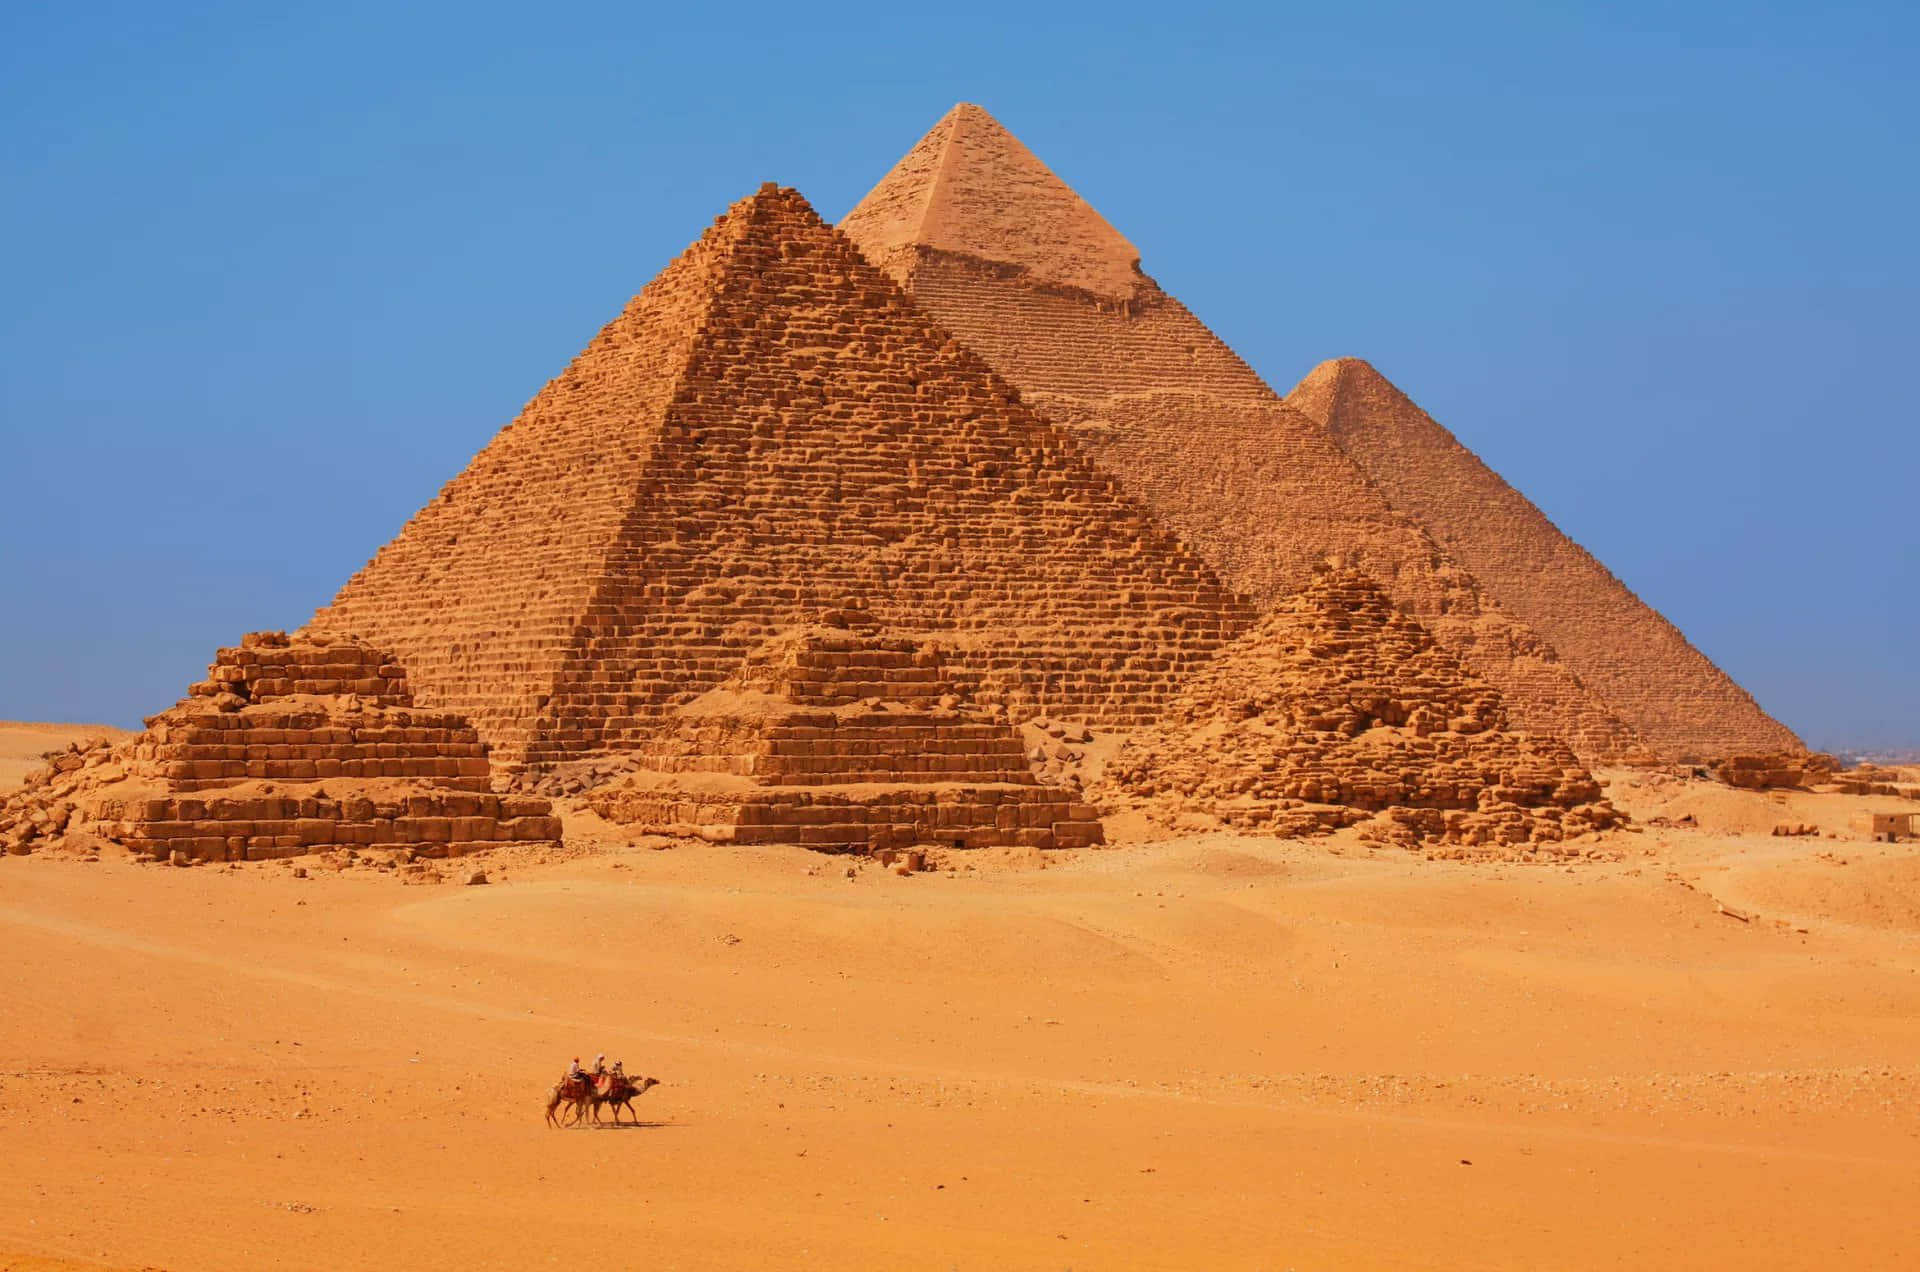 The majestic Pyramids of Giza, an iconic landmark in Egypt